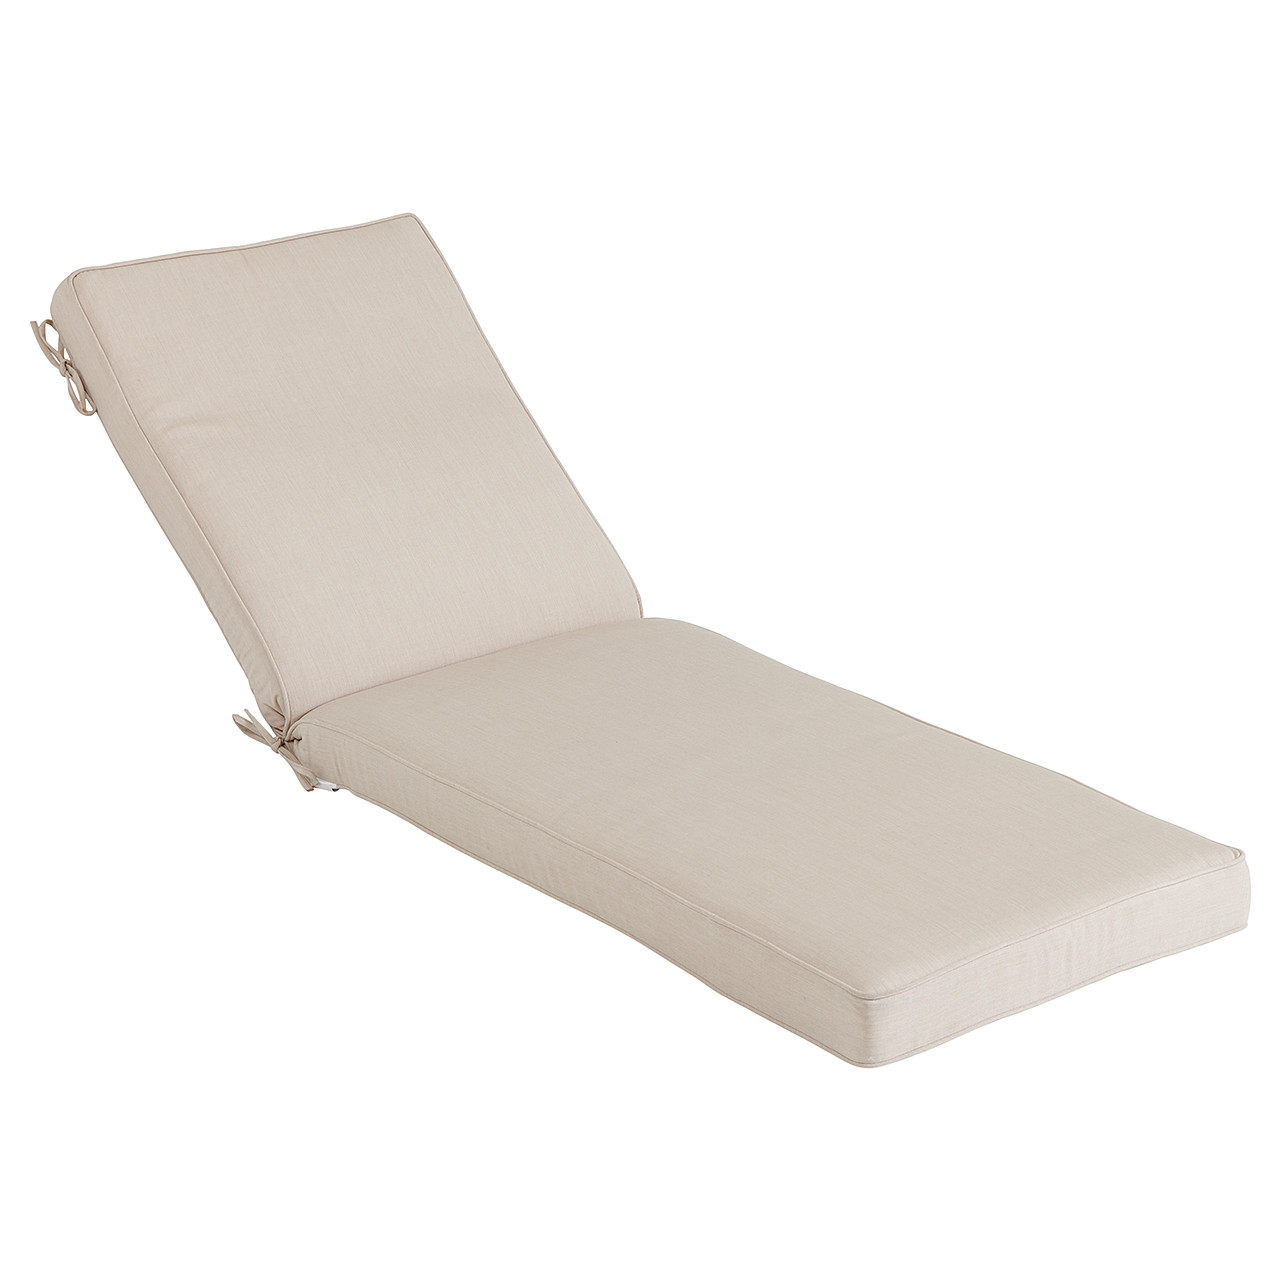 72 x 24 in. Stanford Boxed Chaise Cushion